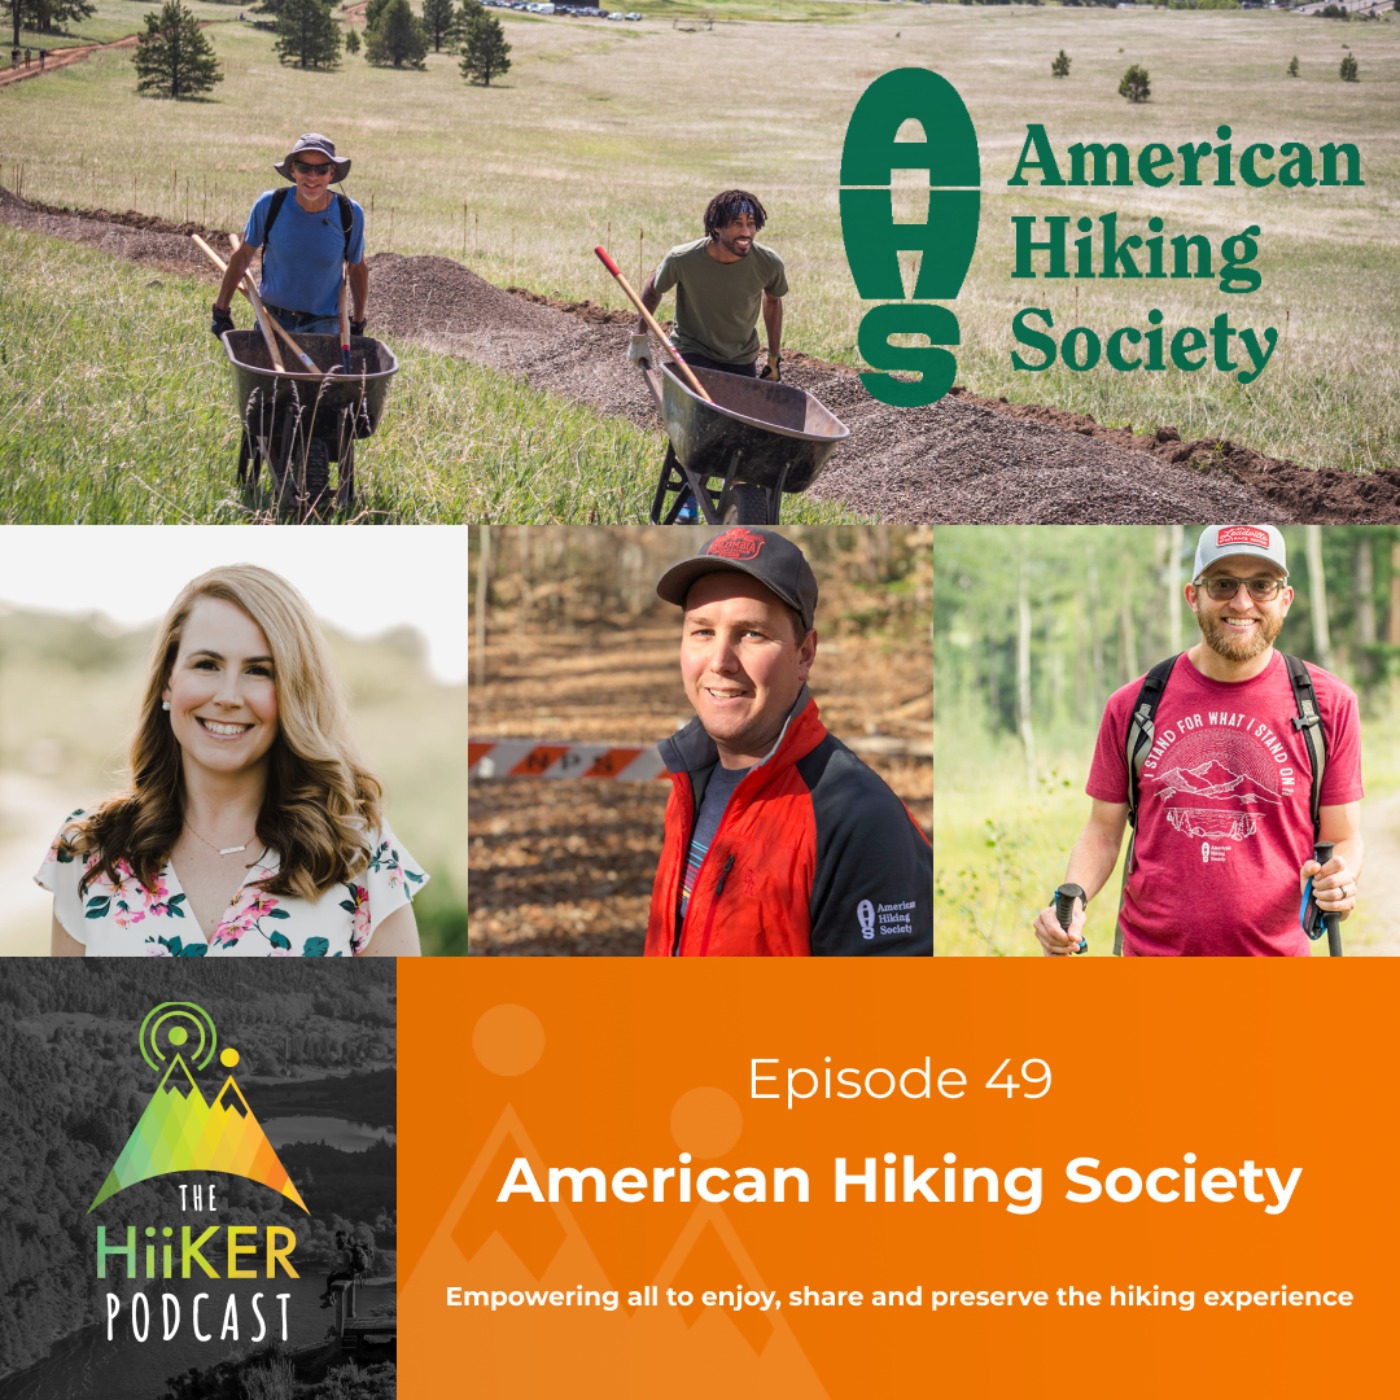 Episode 49 - The American Hiking Society